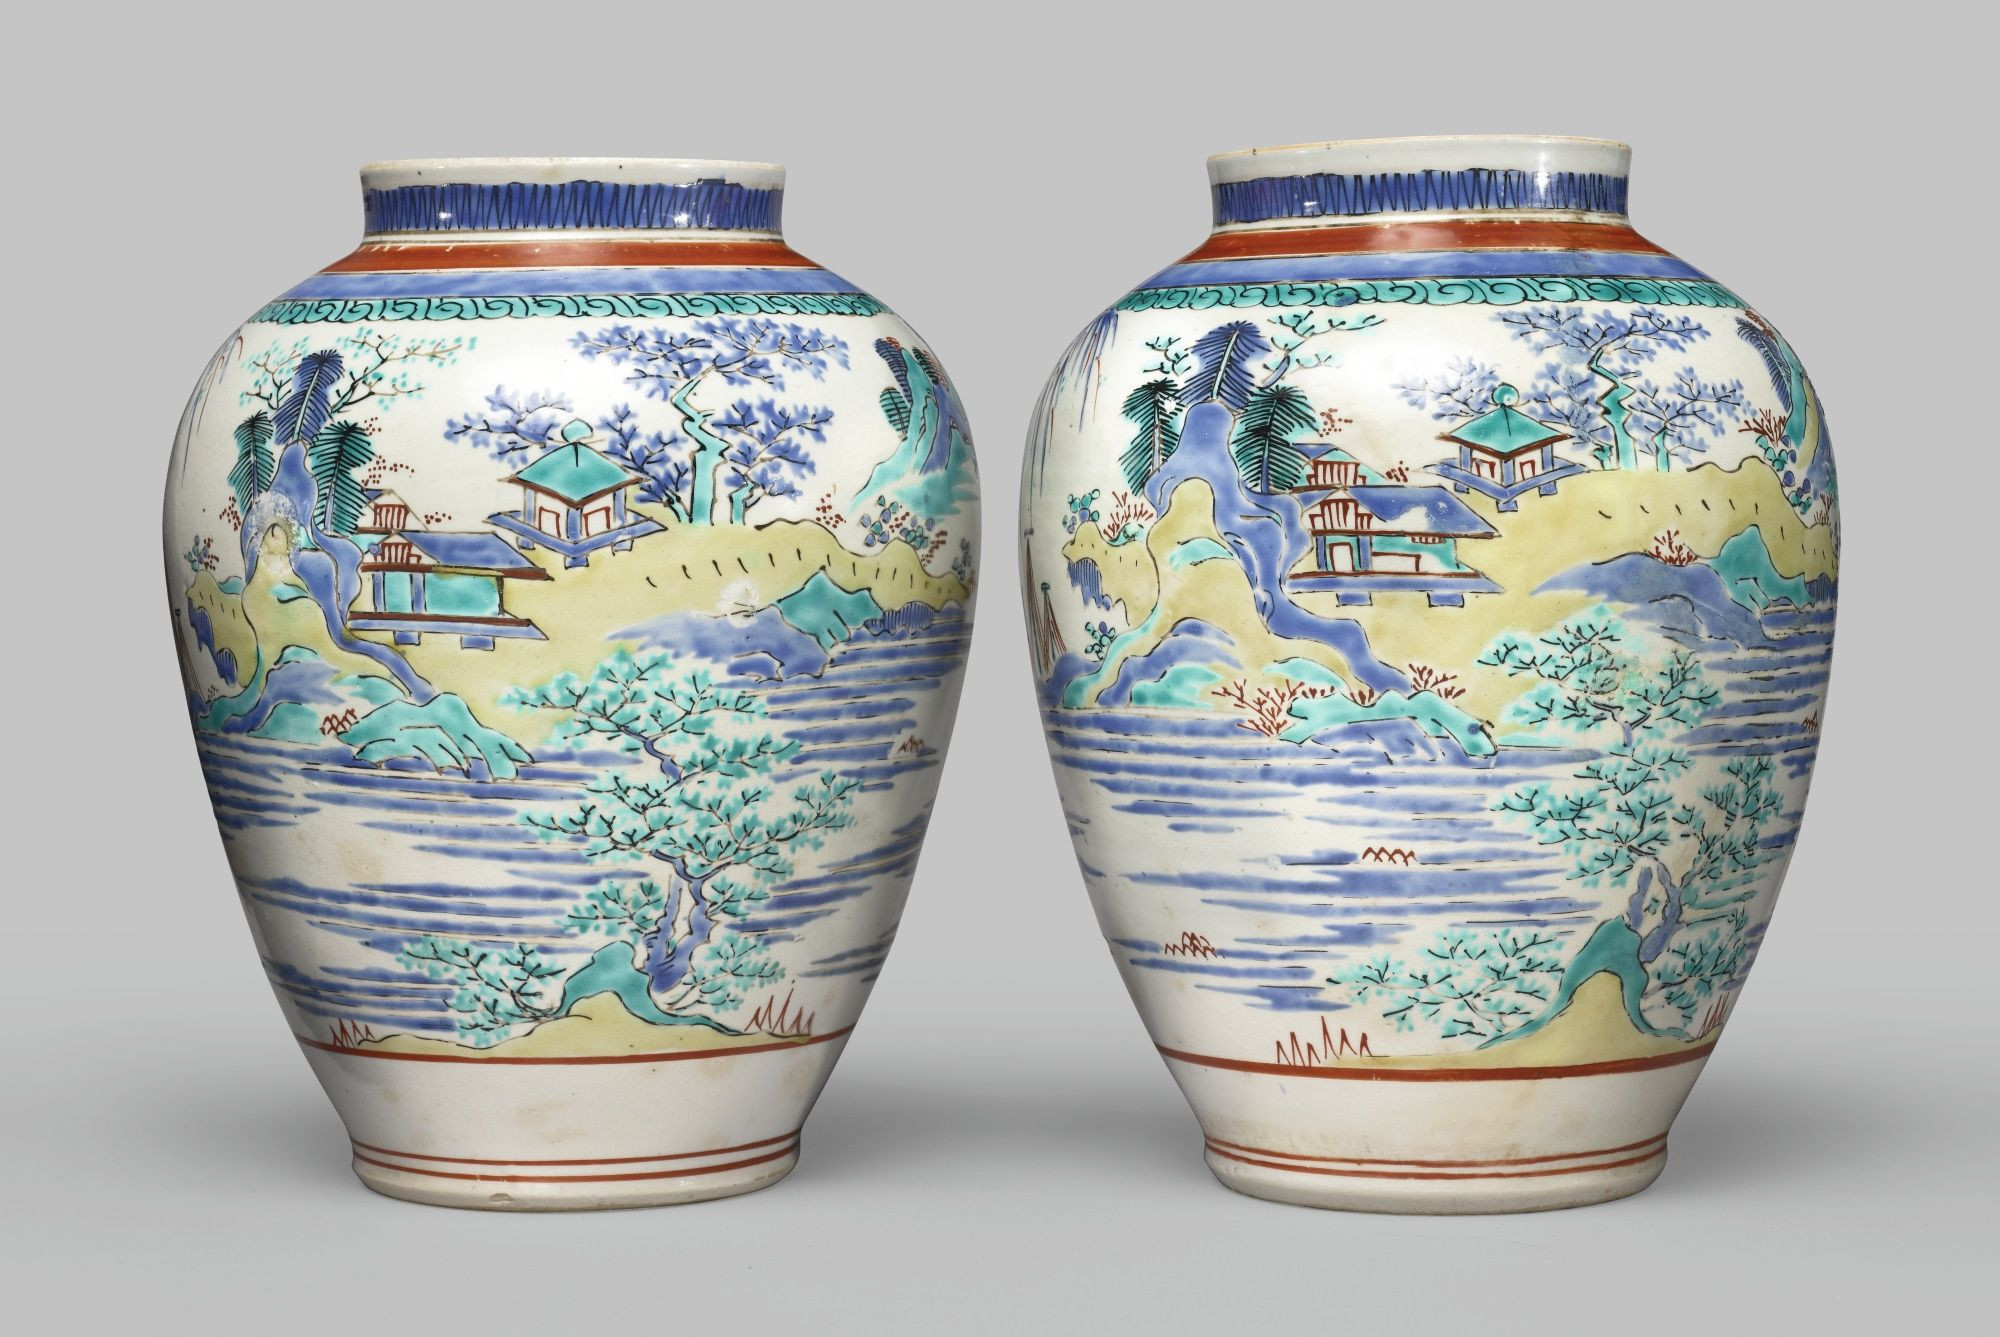 25 Great Gold Imari Vase Value 2024 free download gold imari vase value of a pair of large kakiemon vases japan late 17th century each of for a pair of large kakiemon vases japan late 17th century each of ovoid form decorated in overglazed 